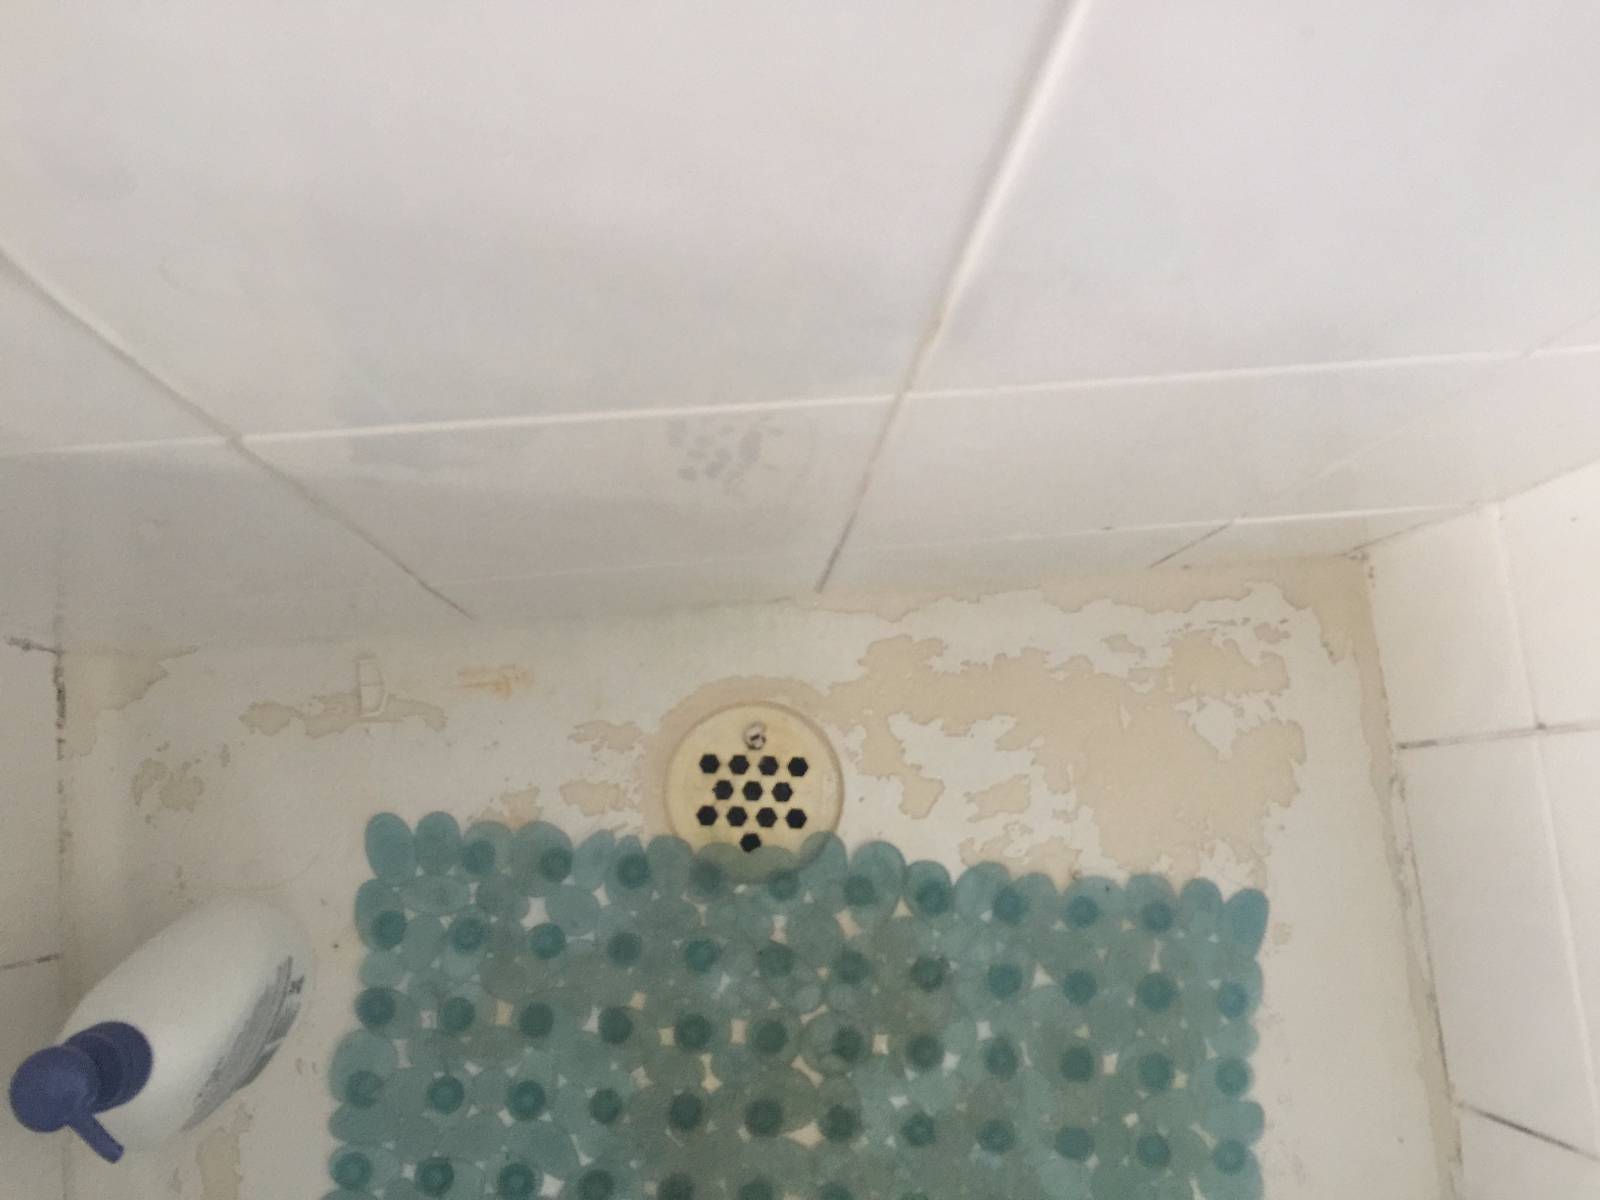 How would you fix this shower problem?